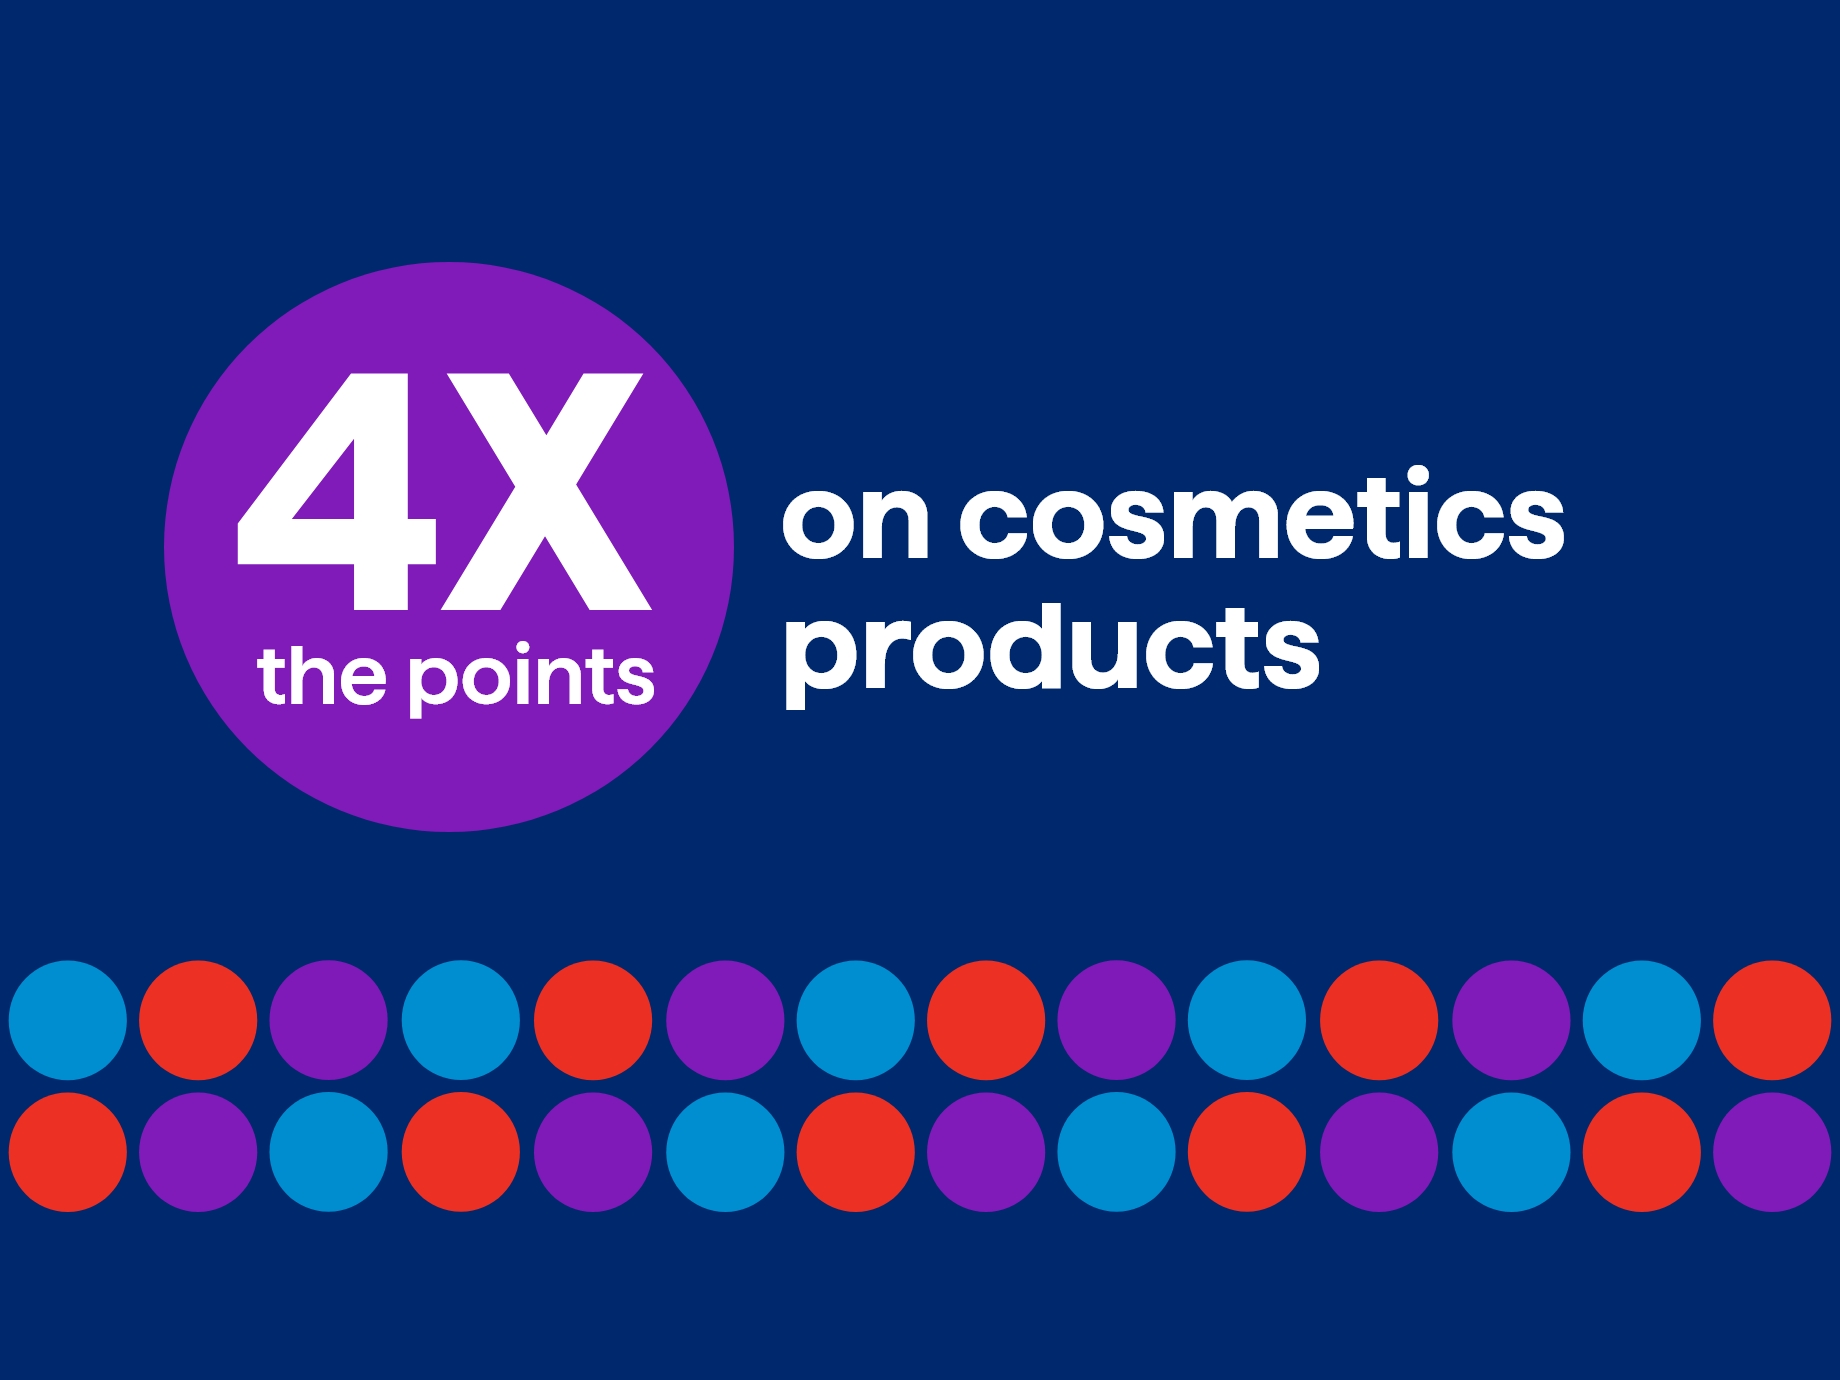 4x the points when I purchase cosmetics products.